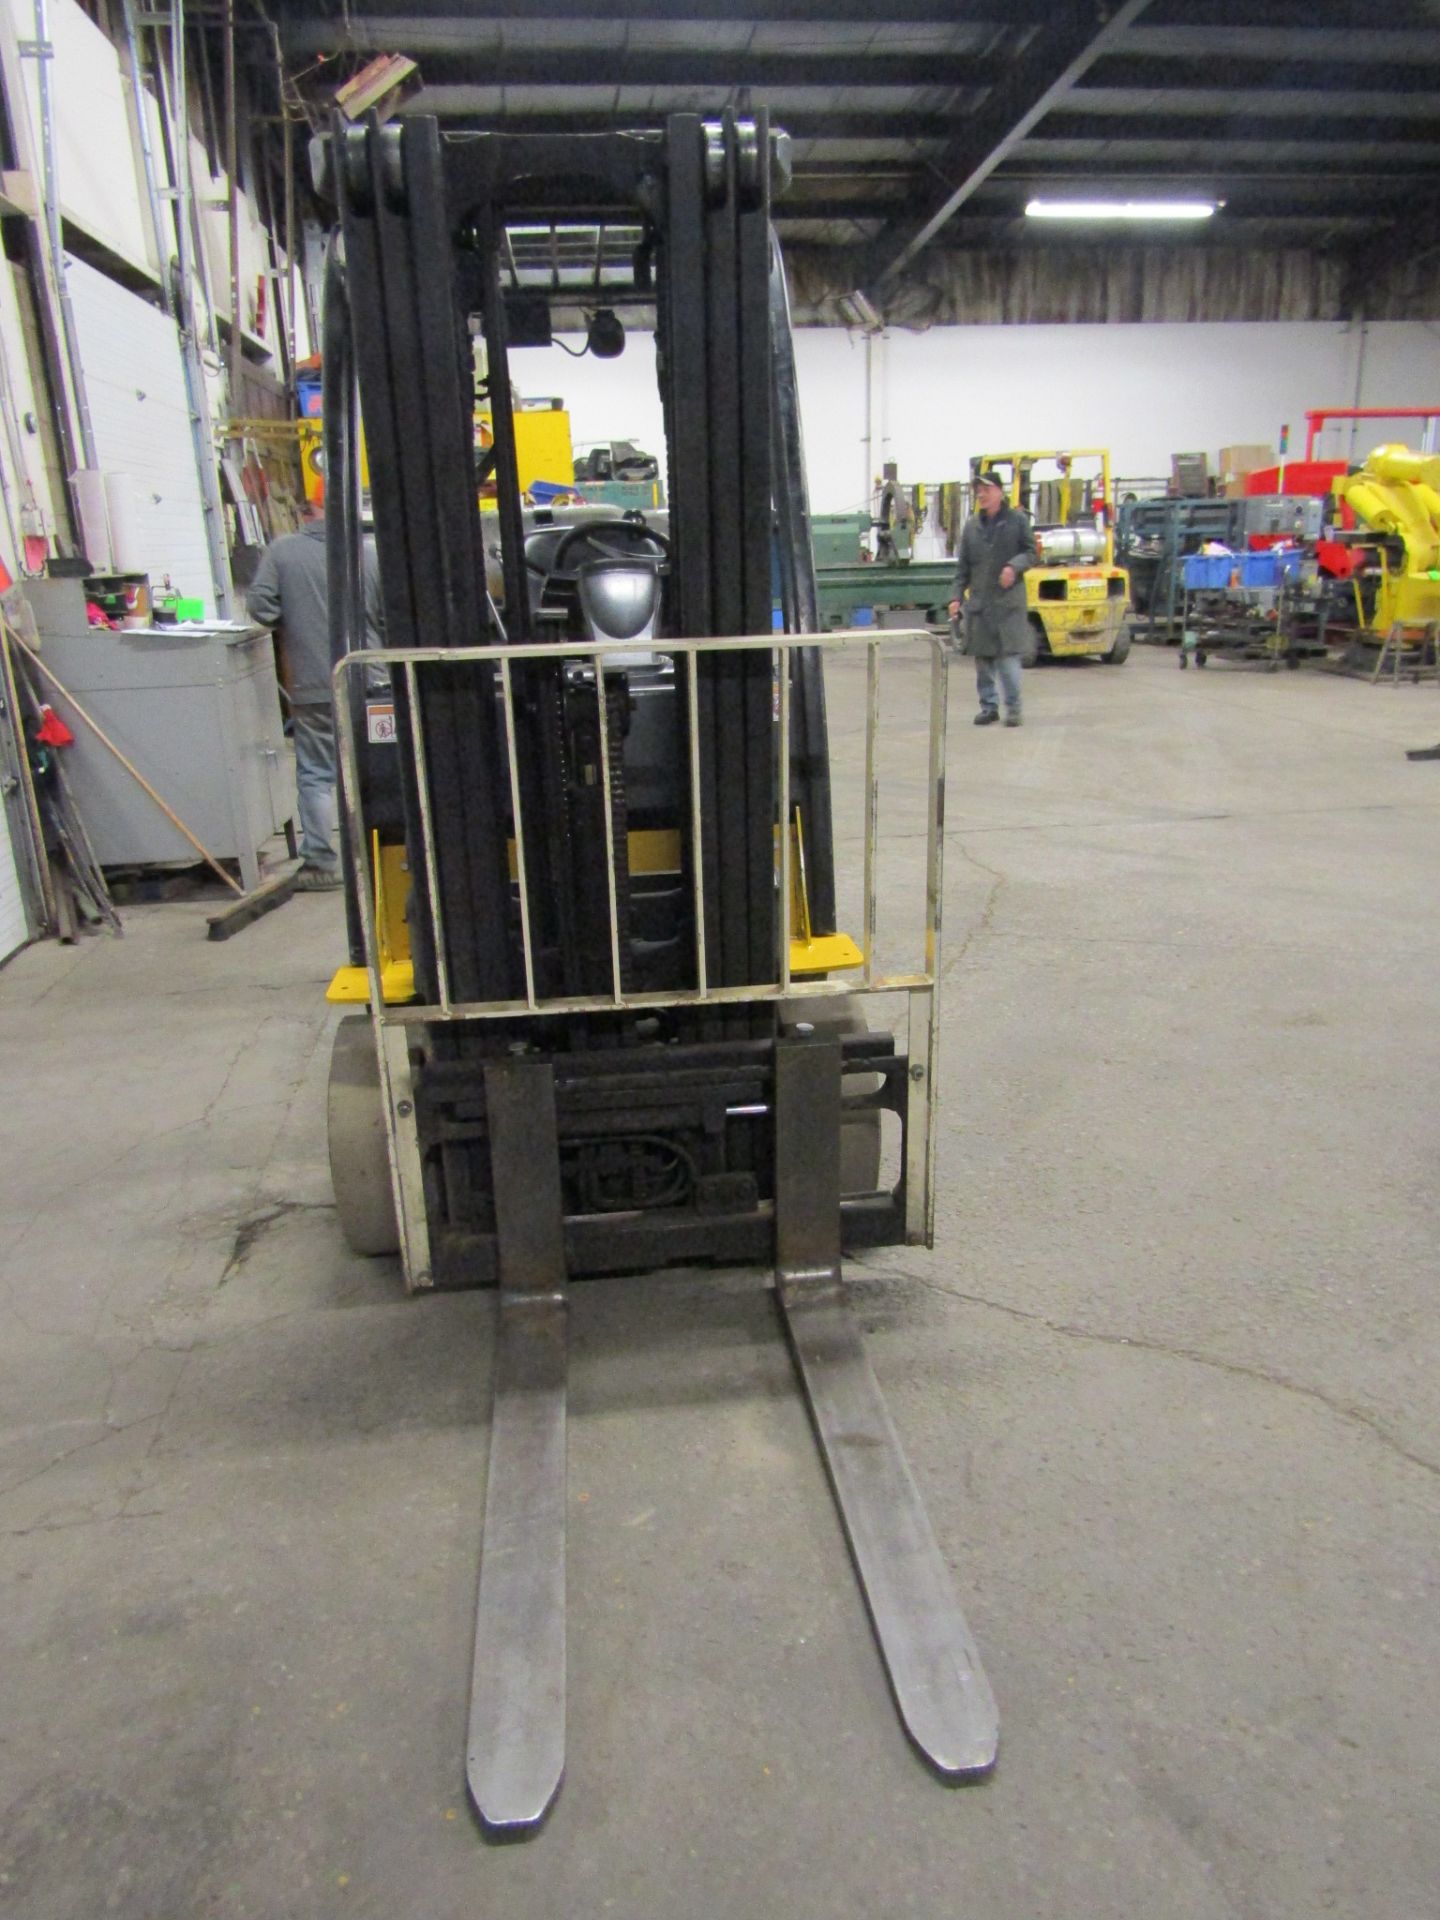 2008 Yale 5000lbs Capacity Forklift - LPG (propane) with 3-stage mast & sideshift (no propane tank - Image 3 of 3